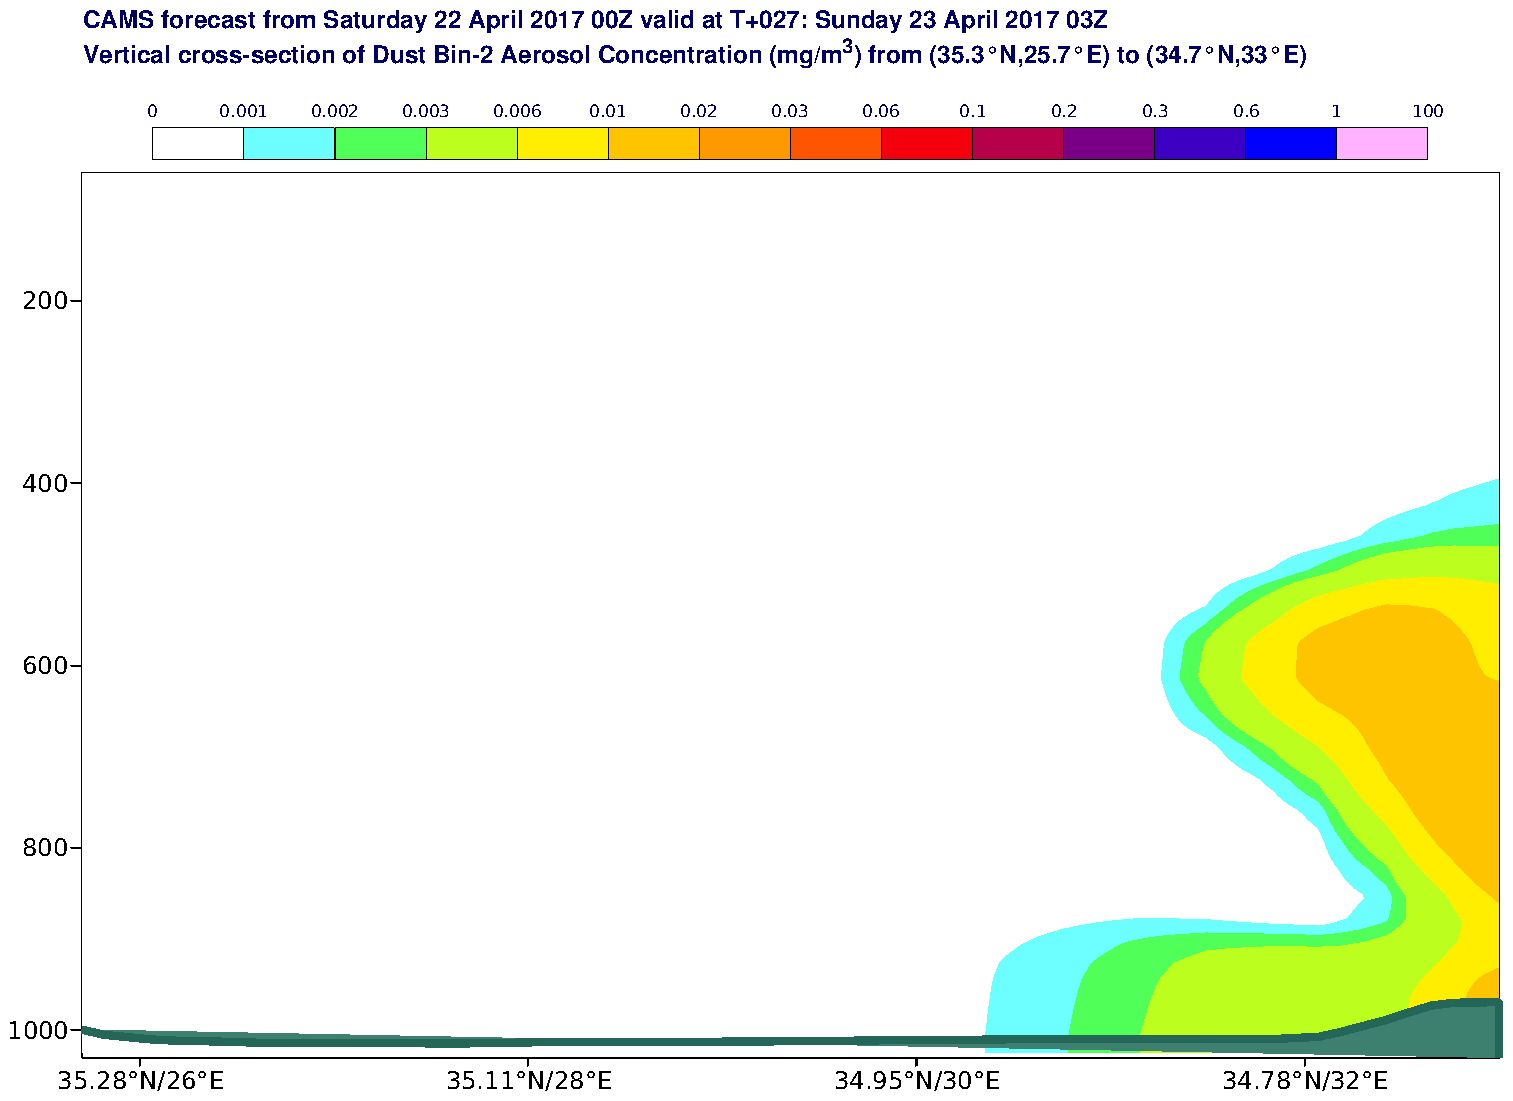 Vertical cross-section of Dust Bin-2 Aerosol Concentration (mg/m3) valid at T27 - 2017-04-23 03:00